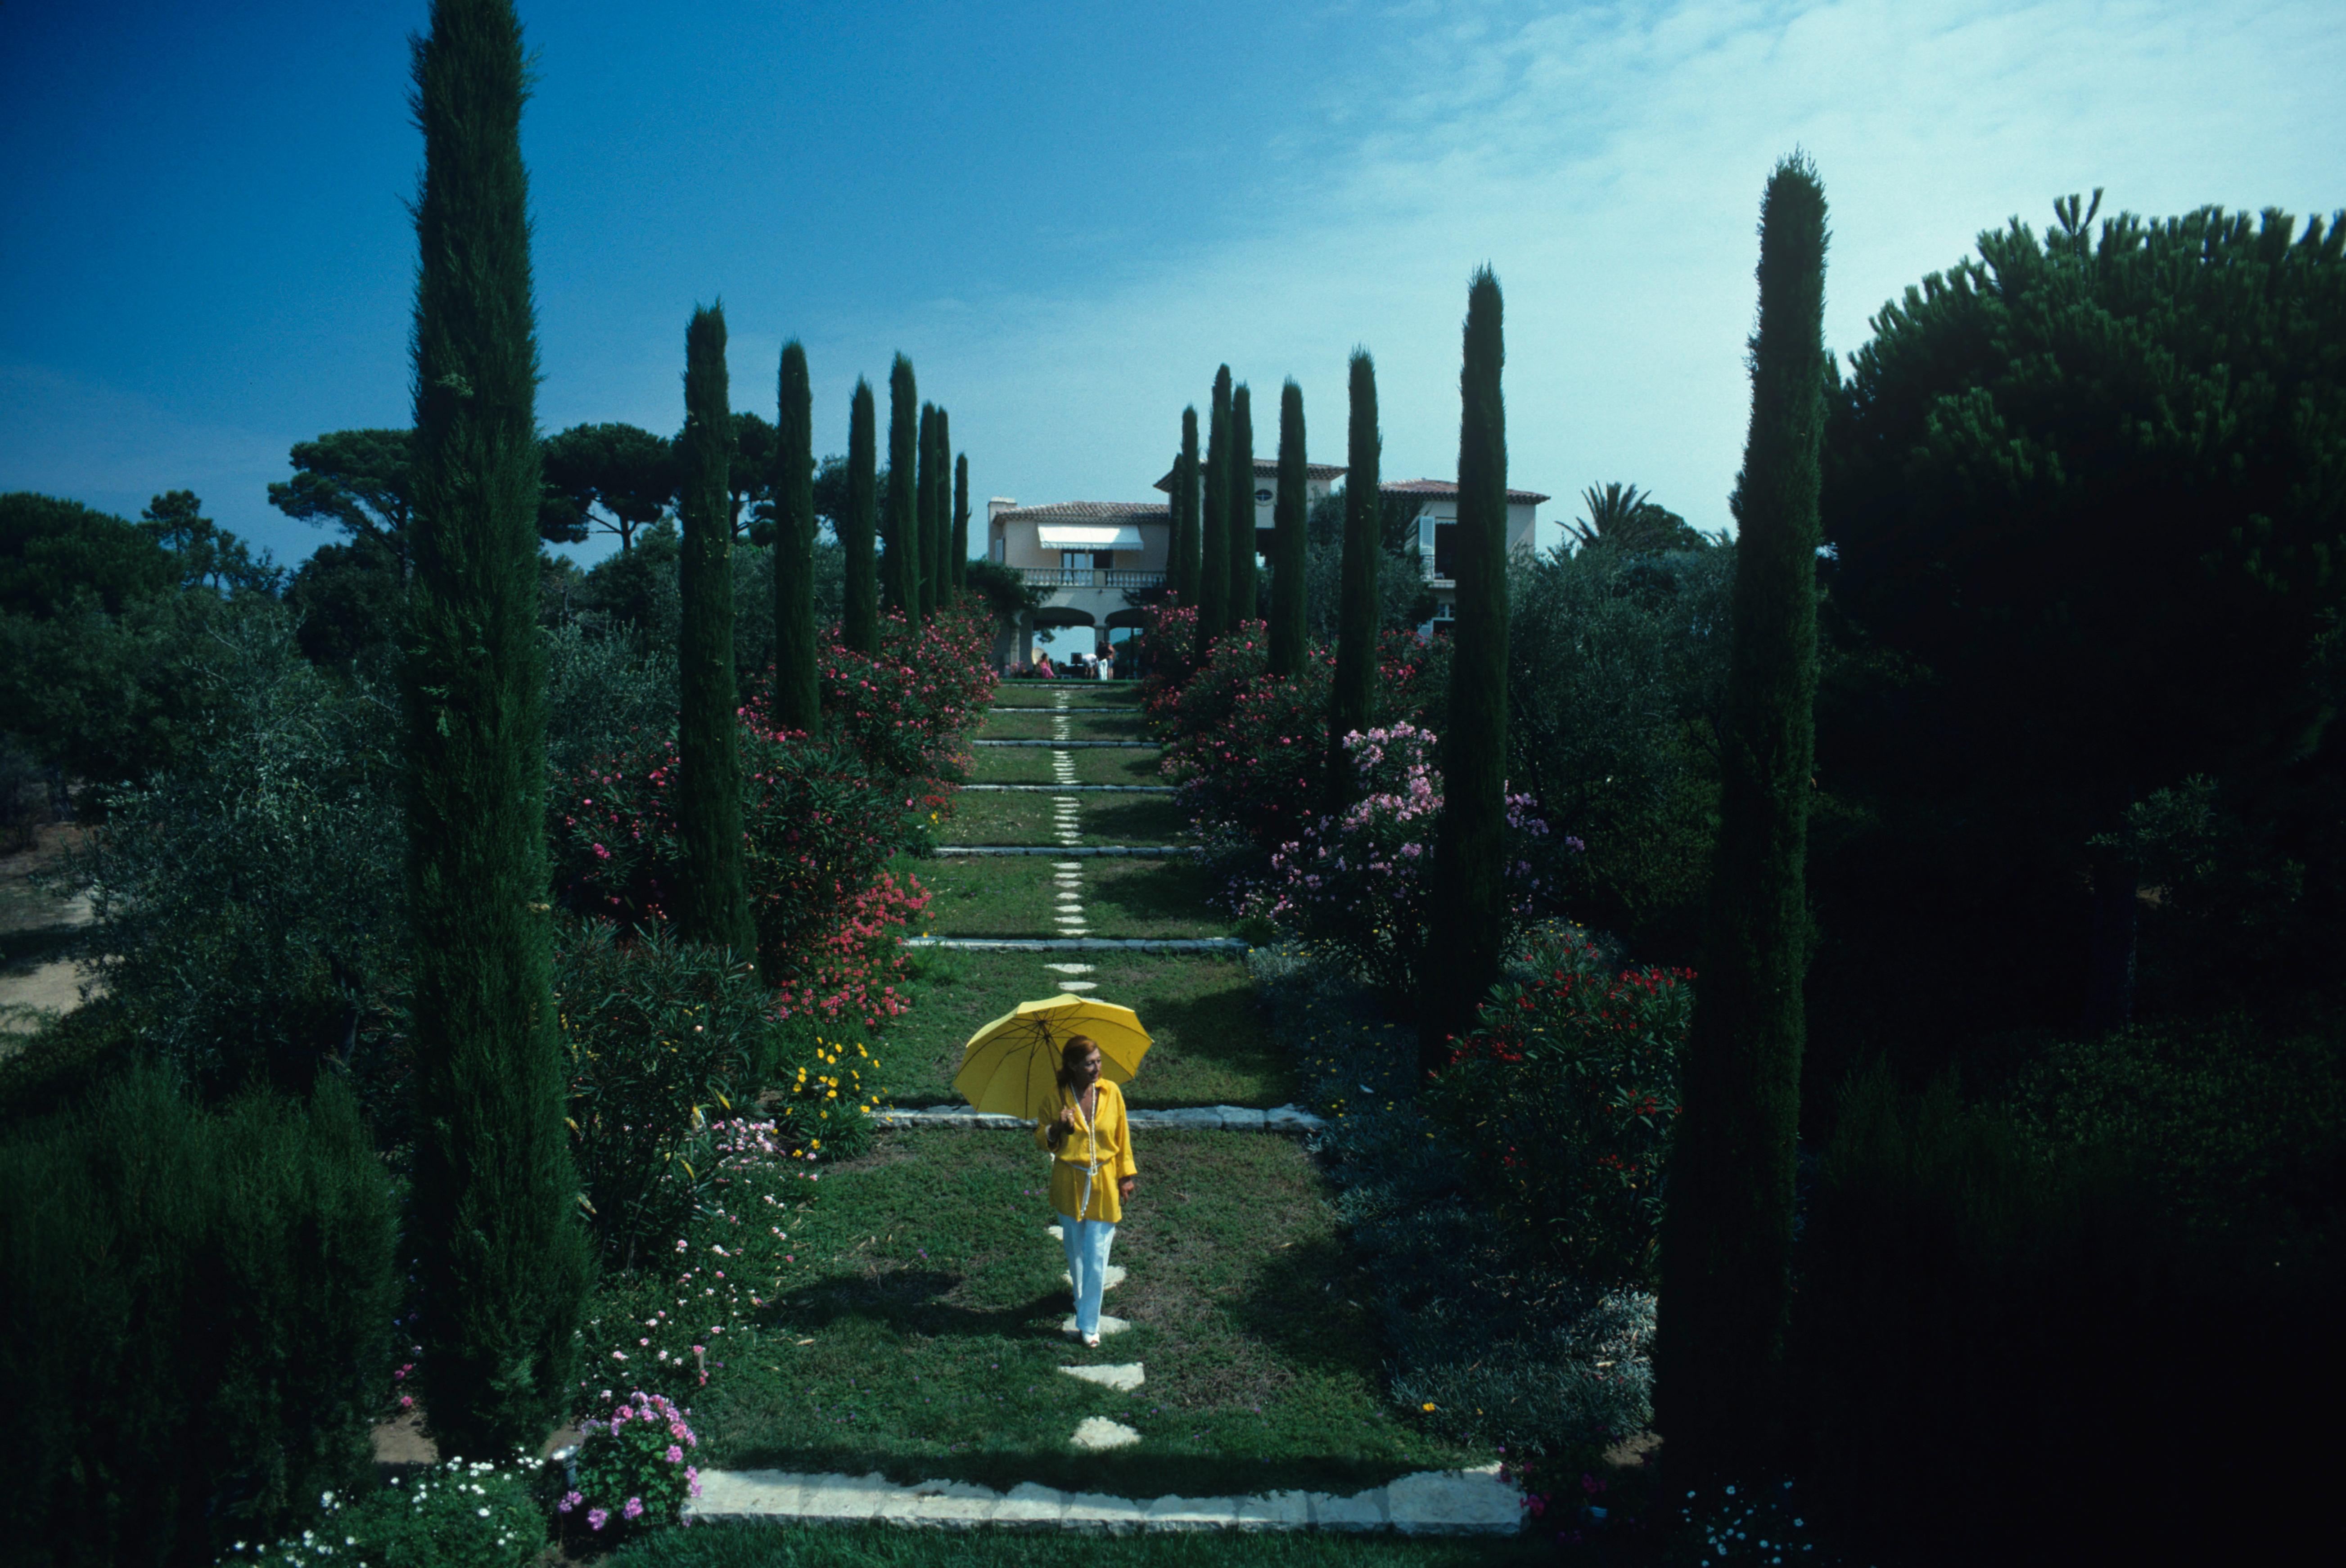 Slim Aarons
Les Sophores
1977. (printed later)
C print 
Estate stamped and numbered edition of 150 
with Certificate of authenticity

Janine Bril in the garden of Les Sophores, her villa in Saint-Tropez, on the French Riviera, August 1977. 

Slim